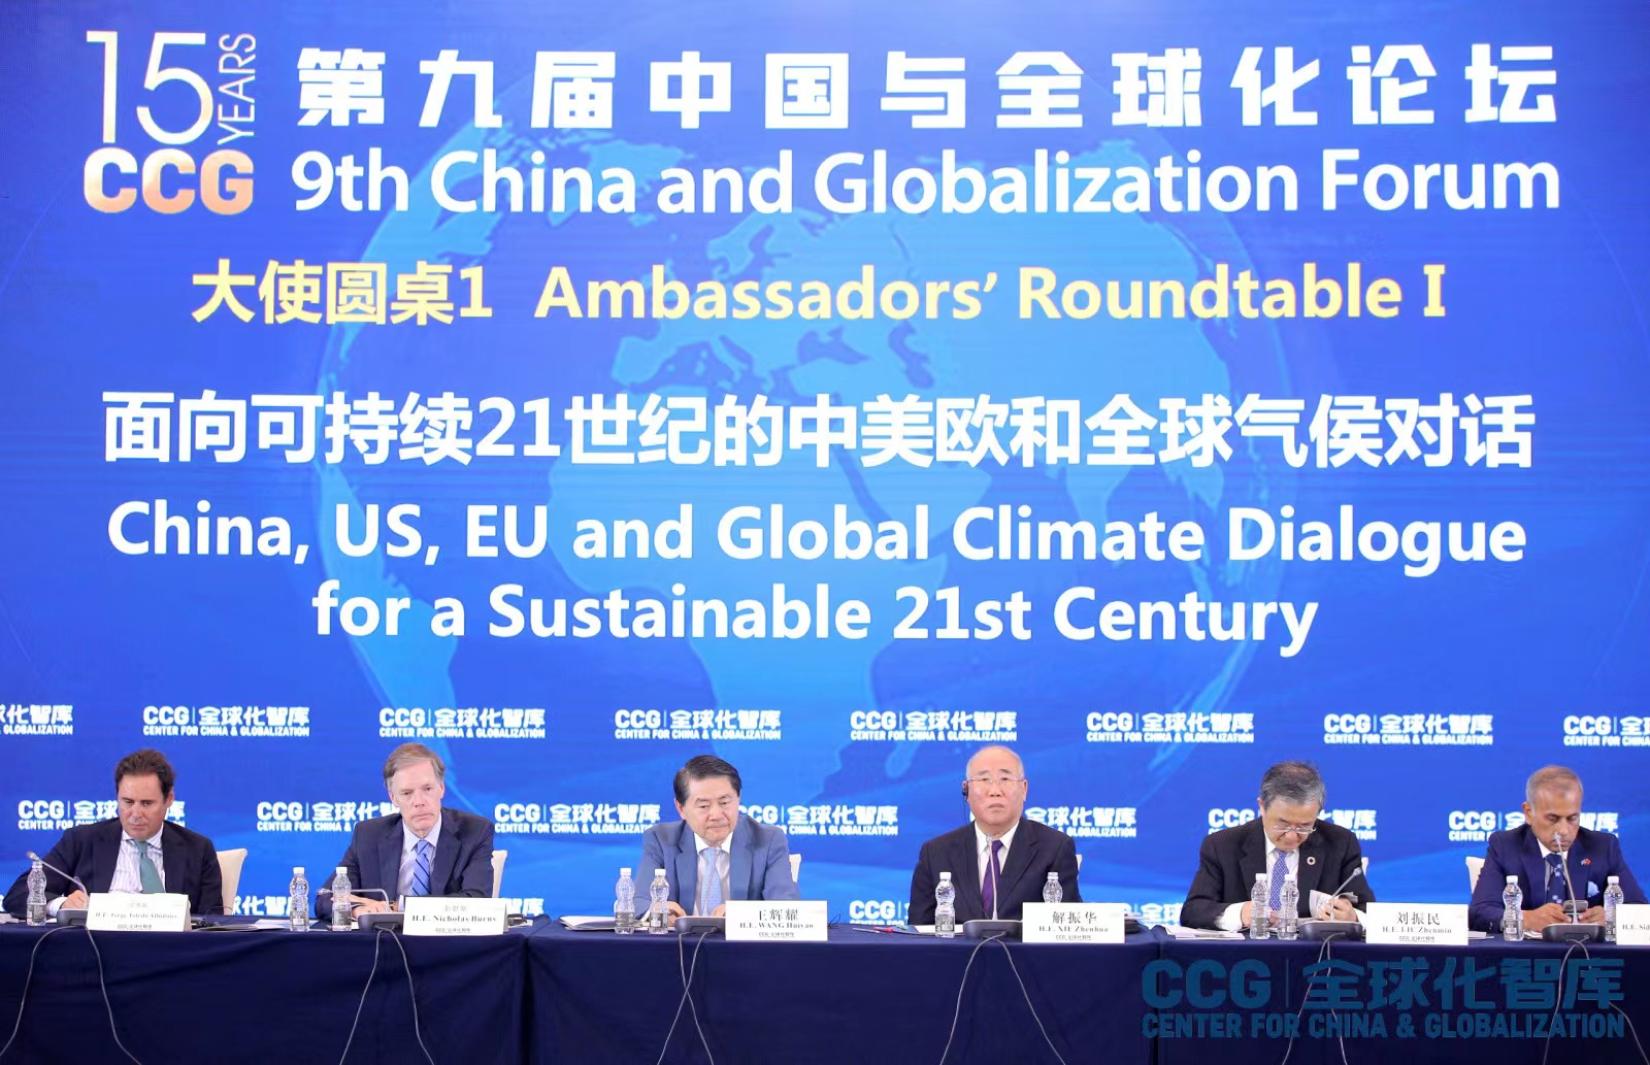 UN Resident Coordinator in China Siddharth Chatterjee at Ambassador’s Roundtable on Climate Dialogue of the 9th China & Globalization Forum